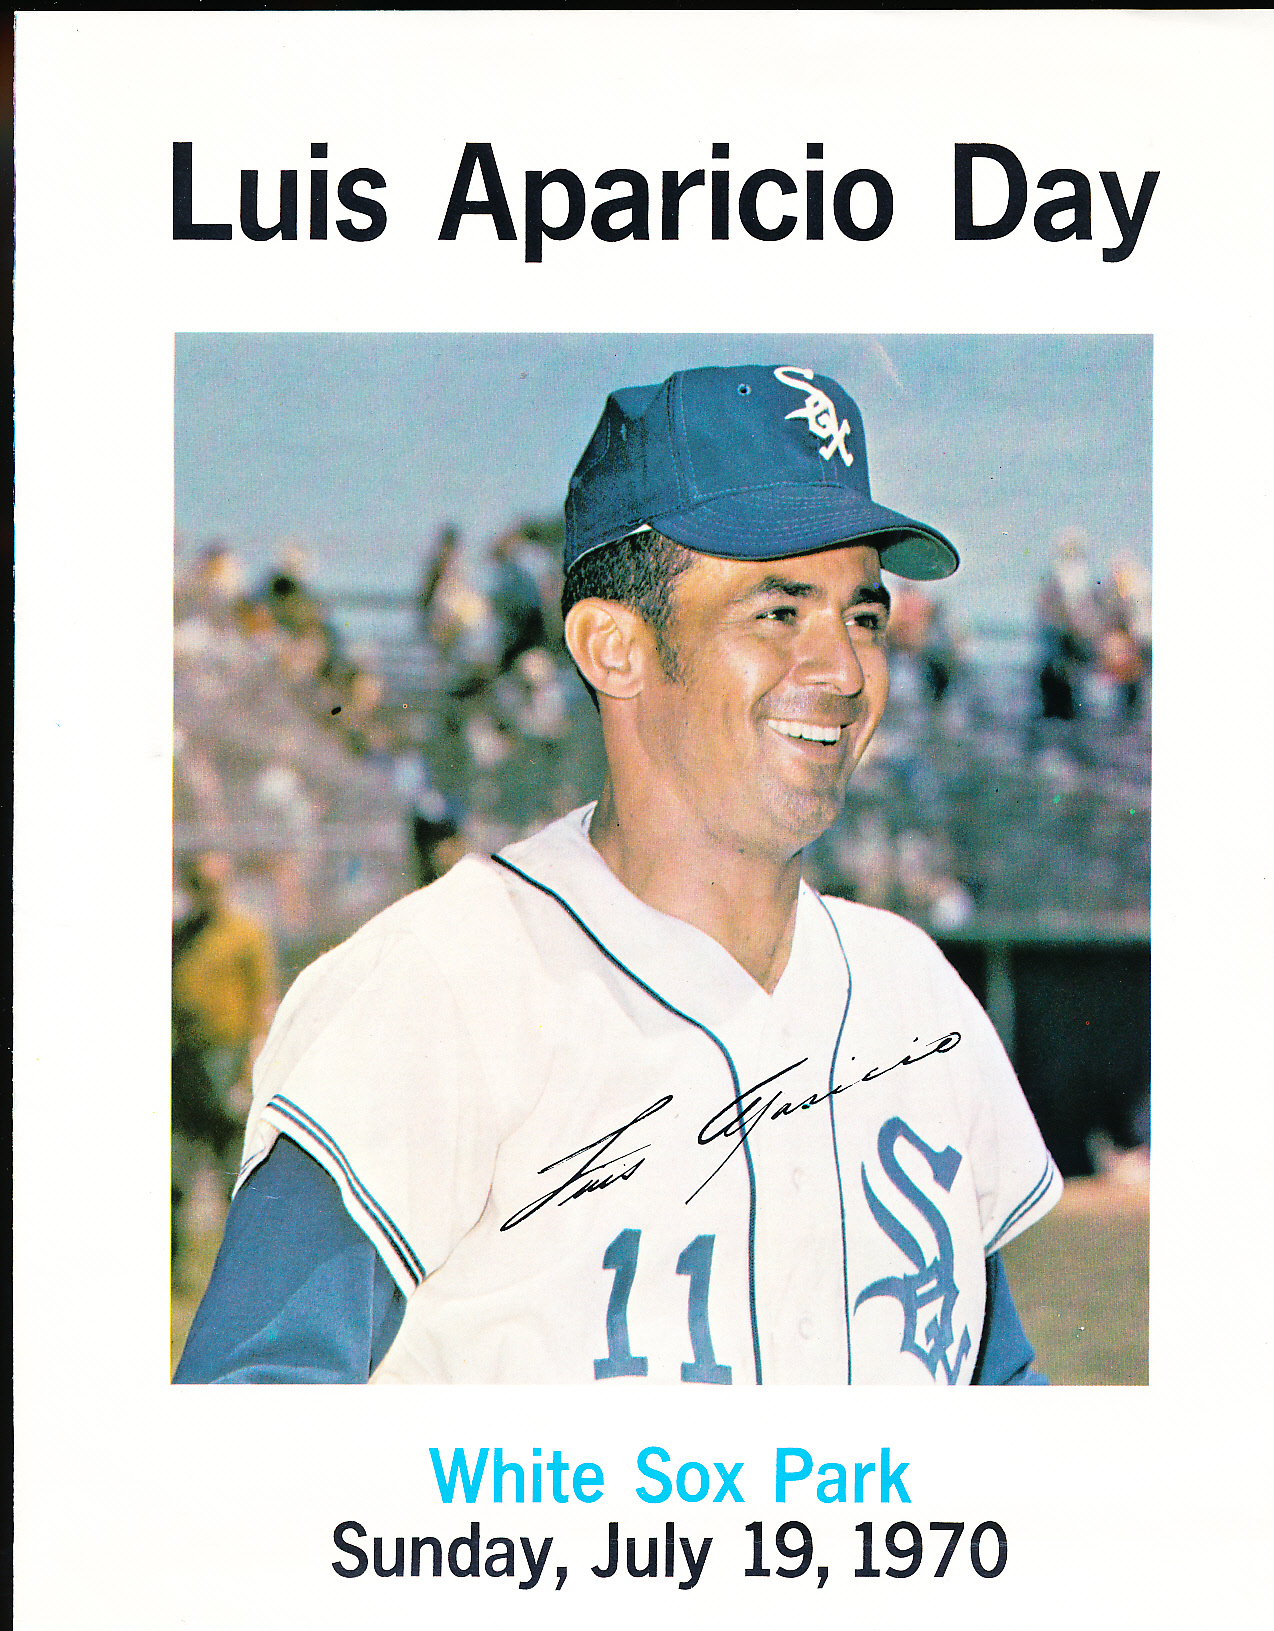 Lot Detail - July 19, 1970 “Luis Aparicio Day” Chicago White Sox Bsbl.  4-Page Program